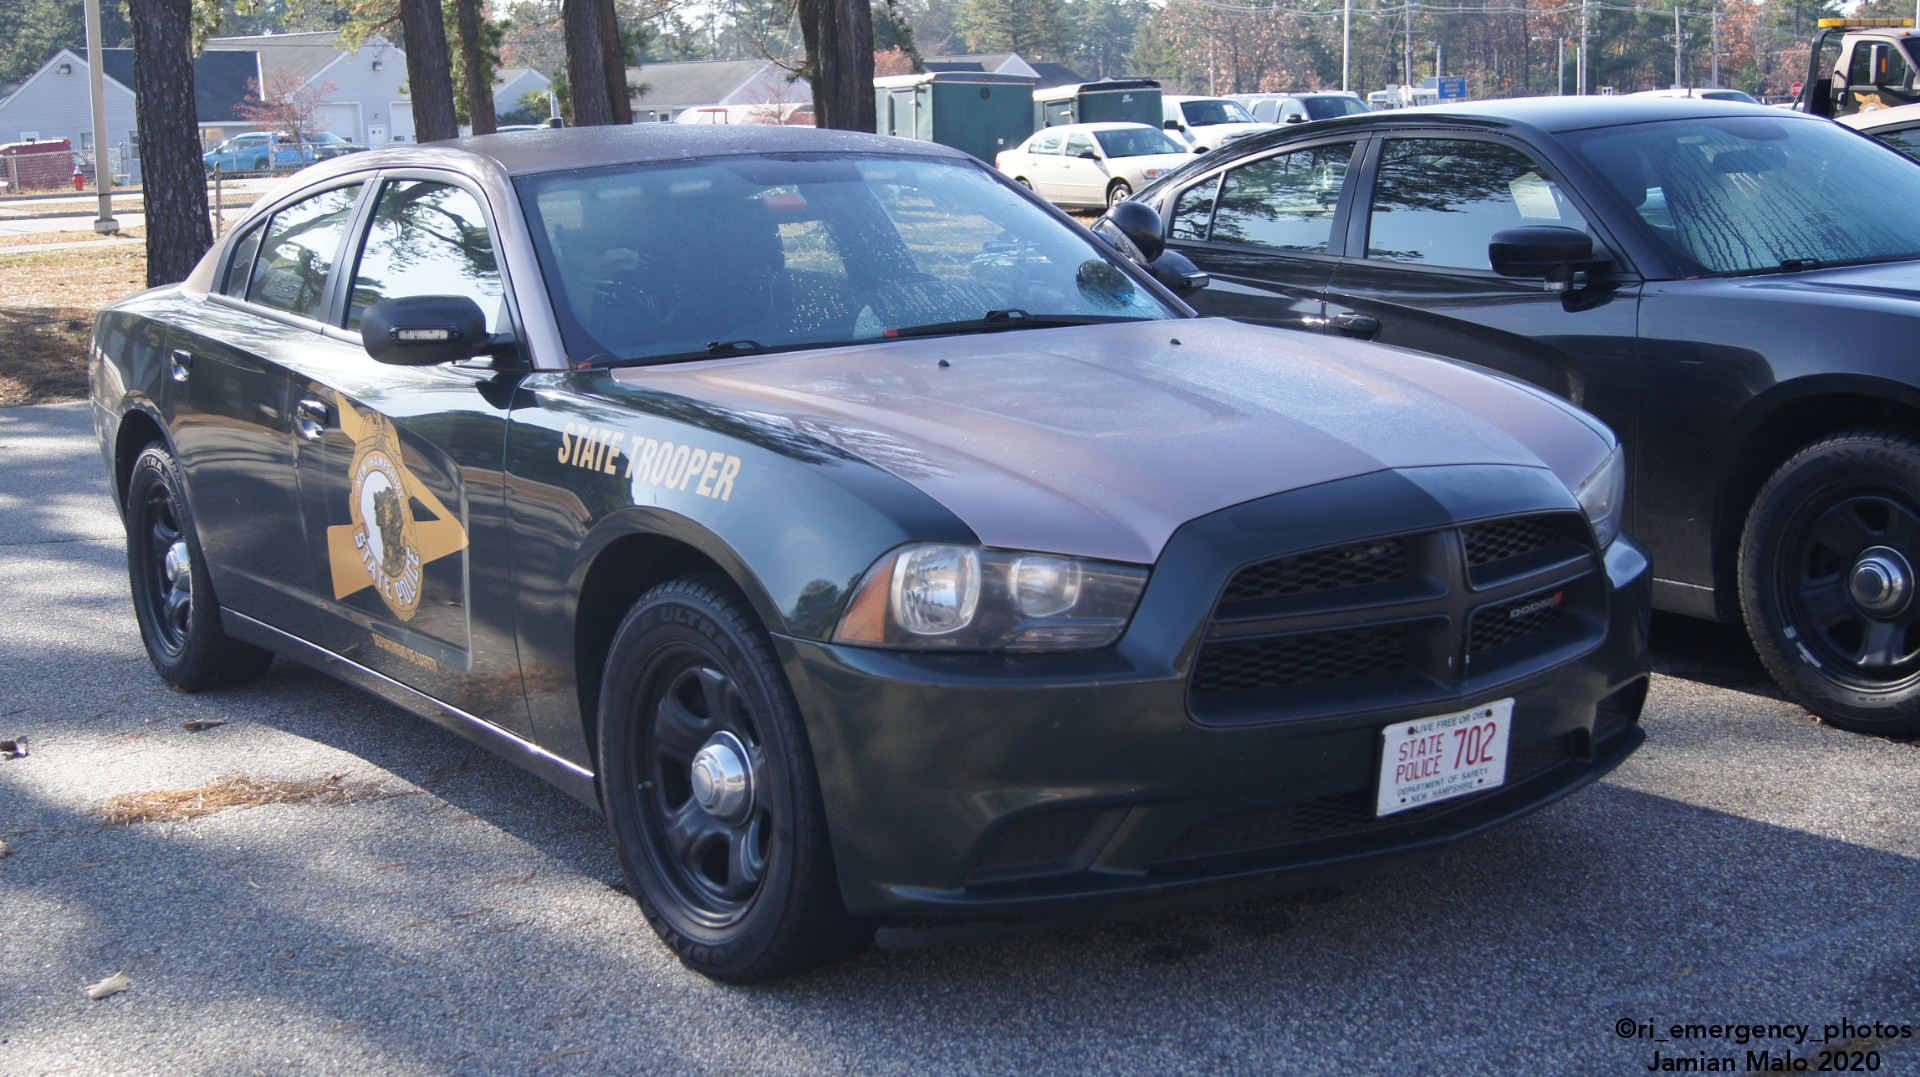 A photo  of New Hampshire State Police
            Cruiser 702, a 2011-2014 Dodge Charger             taken by Jamian Malo